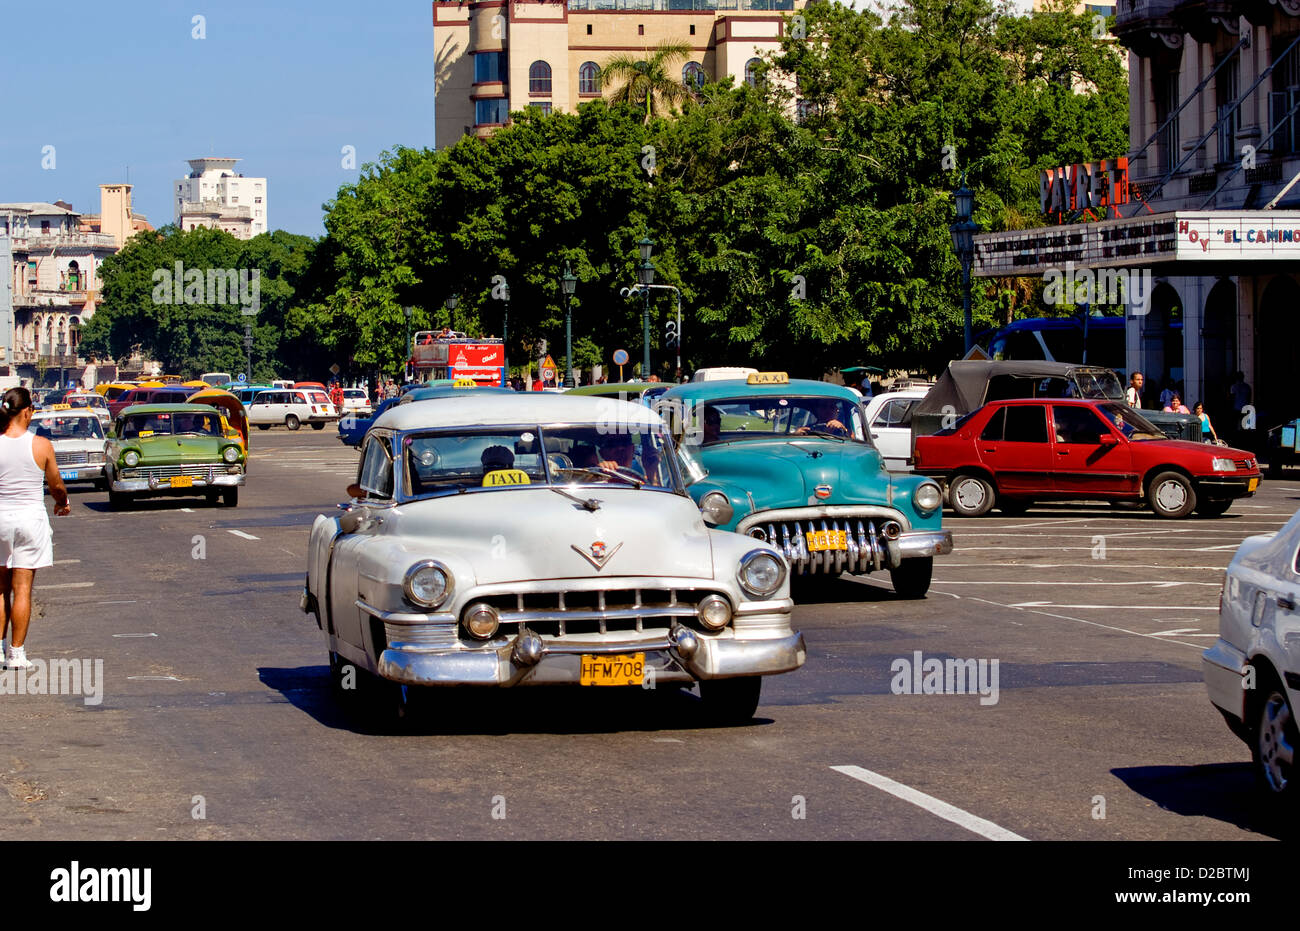 Old American Classic Cars In Central Havana, Cuba Stock Photo